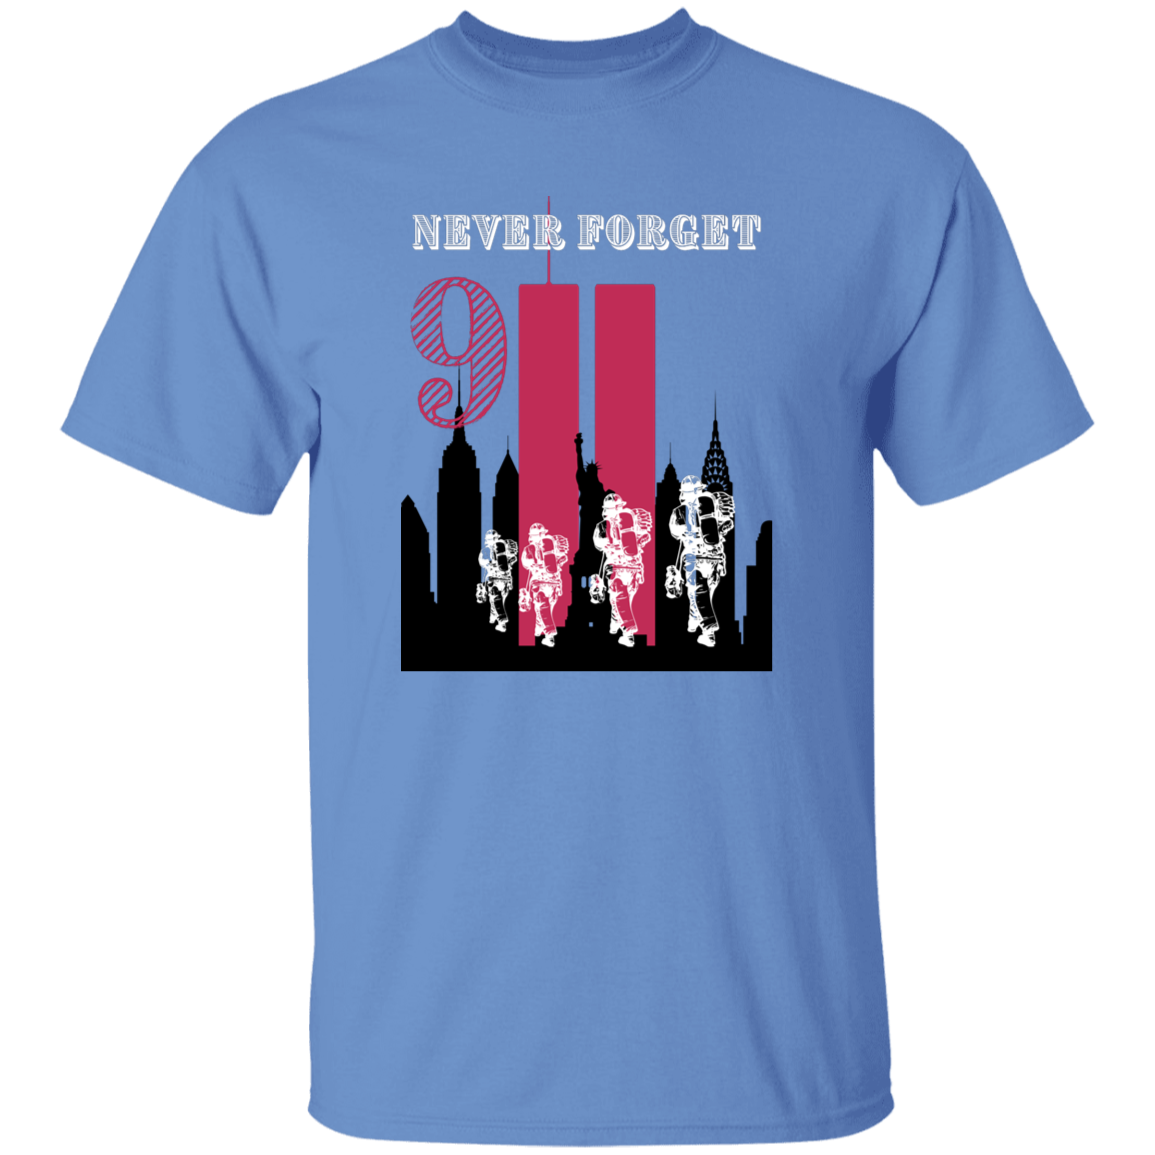 NEVER FORGET YOUTH 5.3 oz 100% Cotton T-Shirt